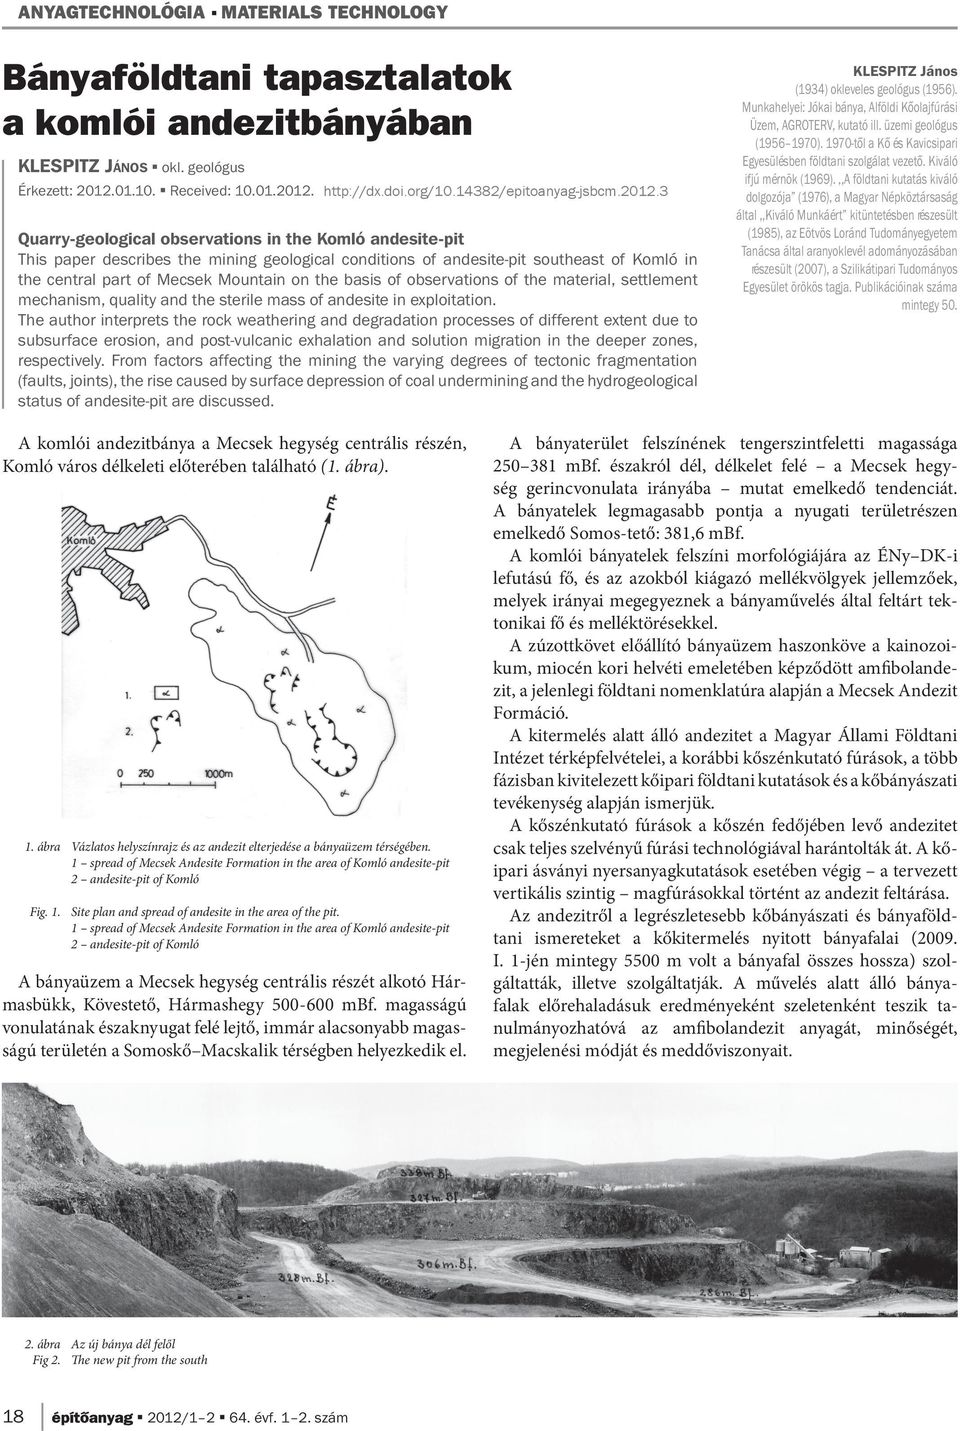 Quarry-geological observations in the Komló andesite-pit This paper describes the mining geological conditions of andesite-pit southeast of Komló in the central part of Mecsek Mountain on the basis